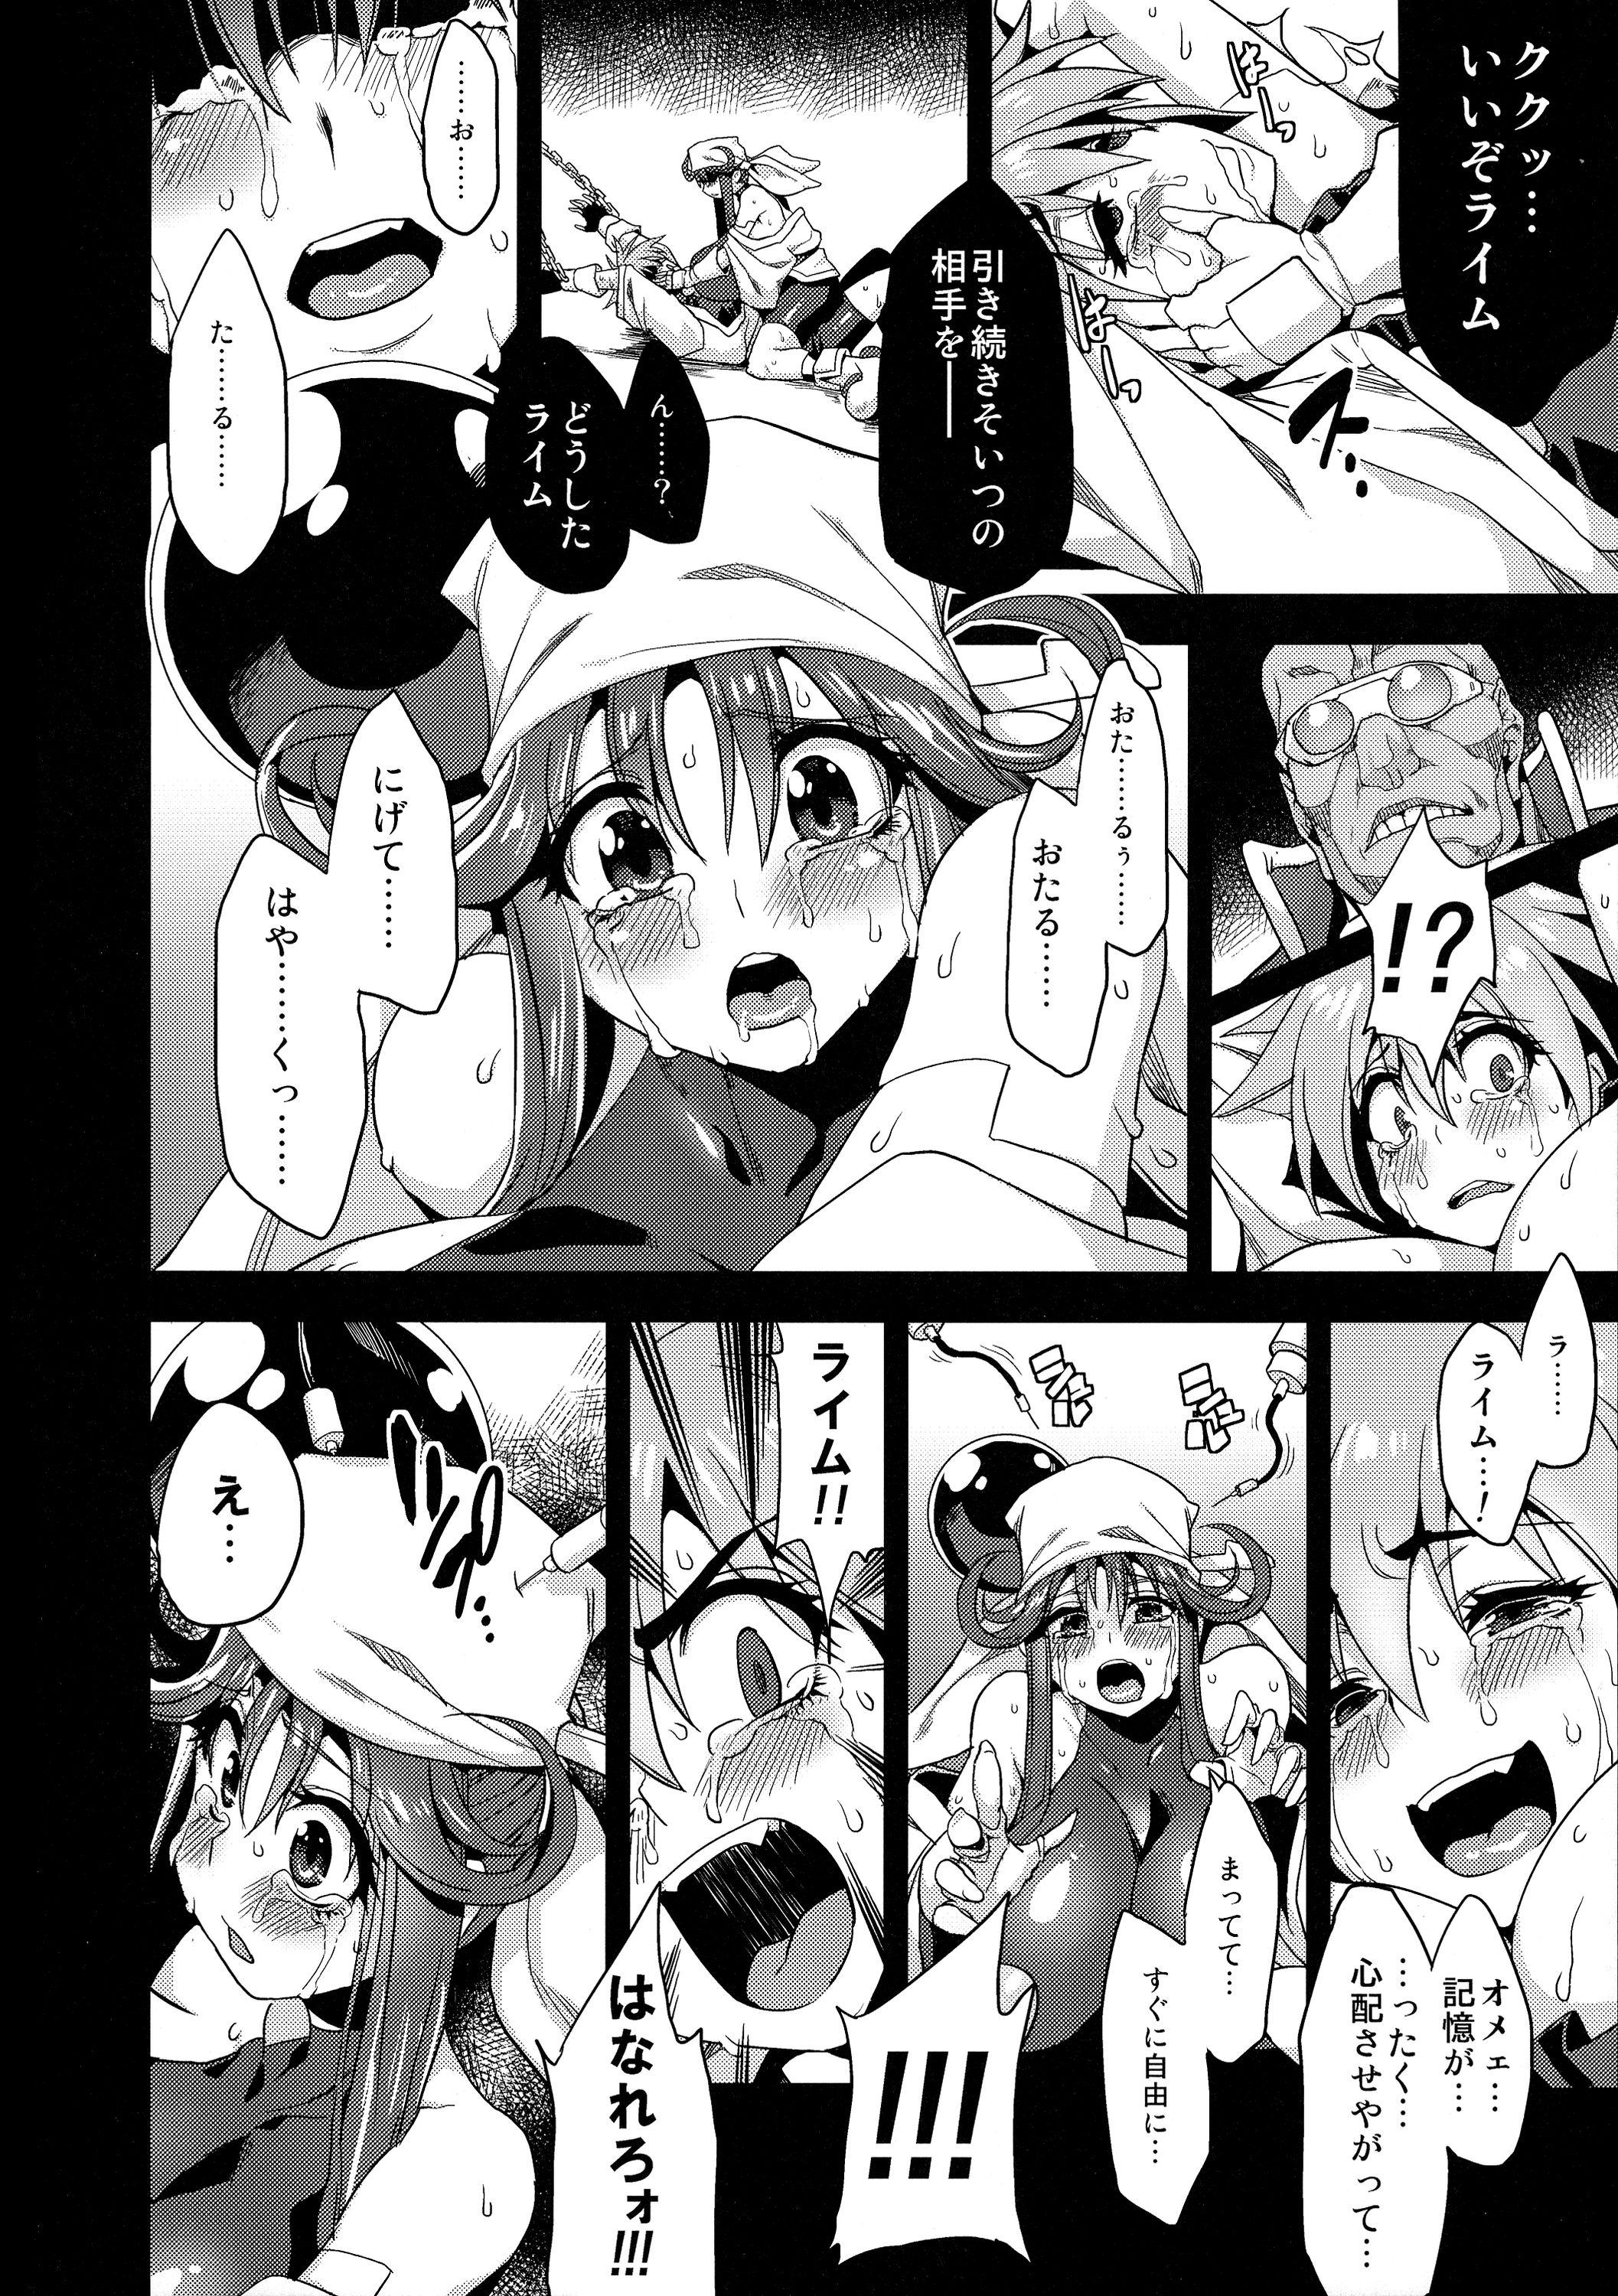 Rough Sex Hentai Marionette 3 - Saber marionette Trimmed - Page 10